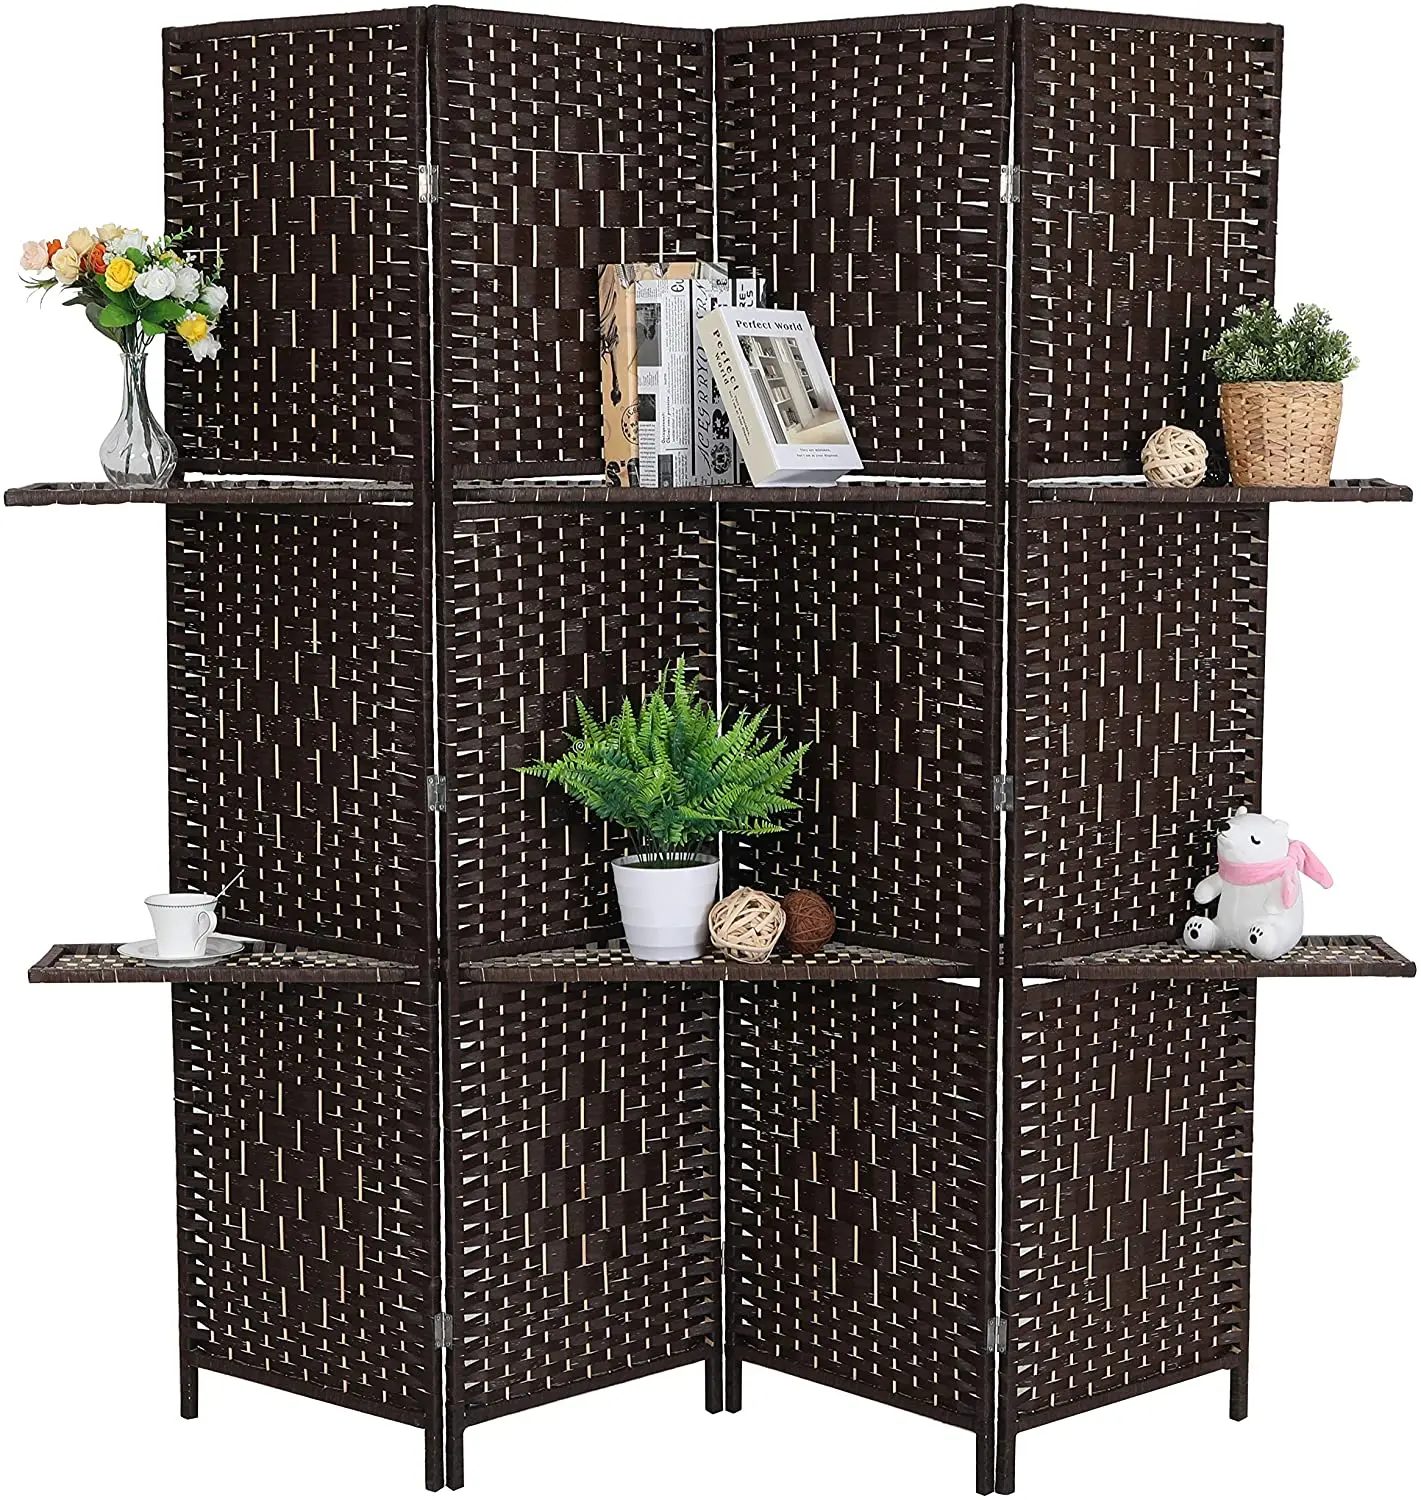 

Multi-function cheap hand woven folding room partition divider with display shelf screens room divider, Black/light brown /dark brown/ice cream